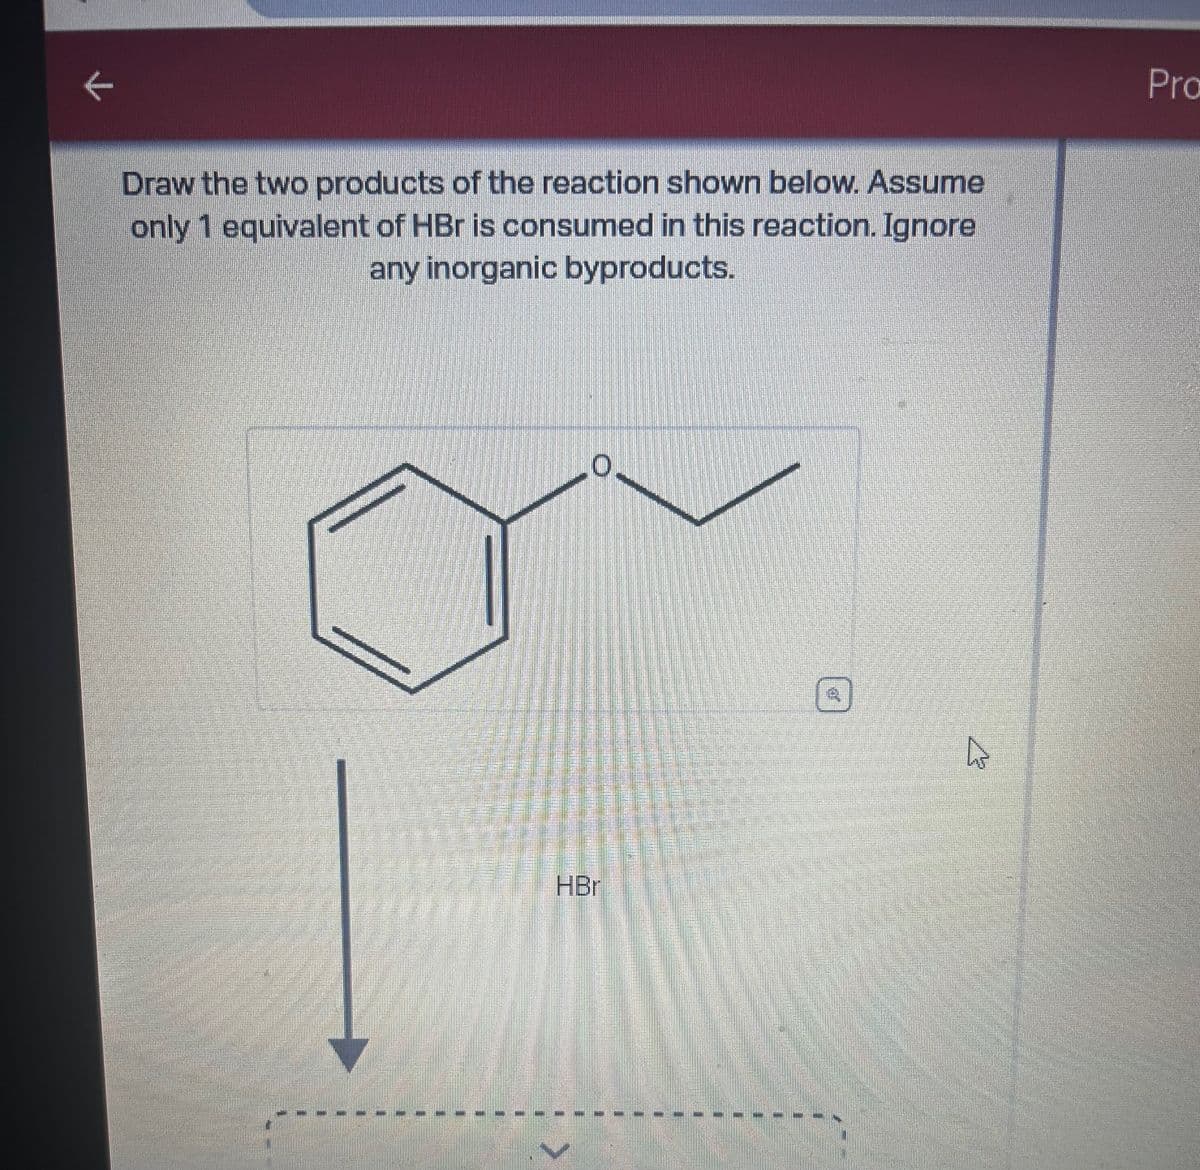 K
Draw the two products of the reaction shown below. Assume
only 1 equivalent of HBr is consumed in this reaction. Ignore
any inorganic byproducts.
0.
HBr
Ta
4
A
Pro